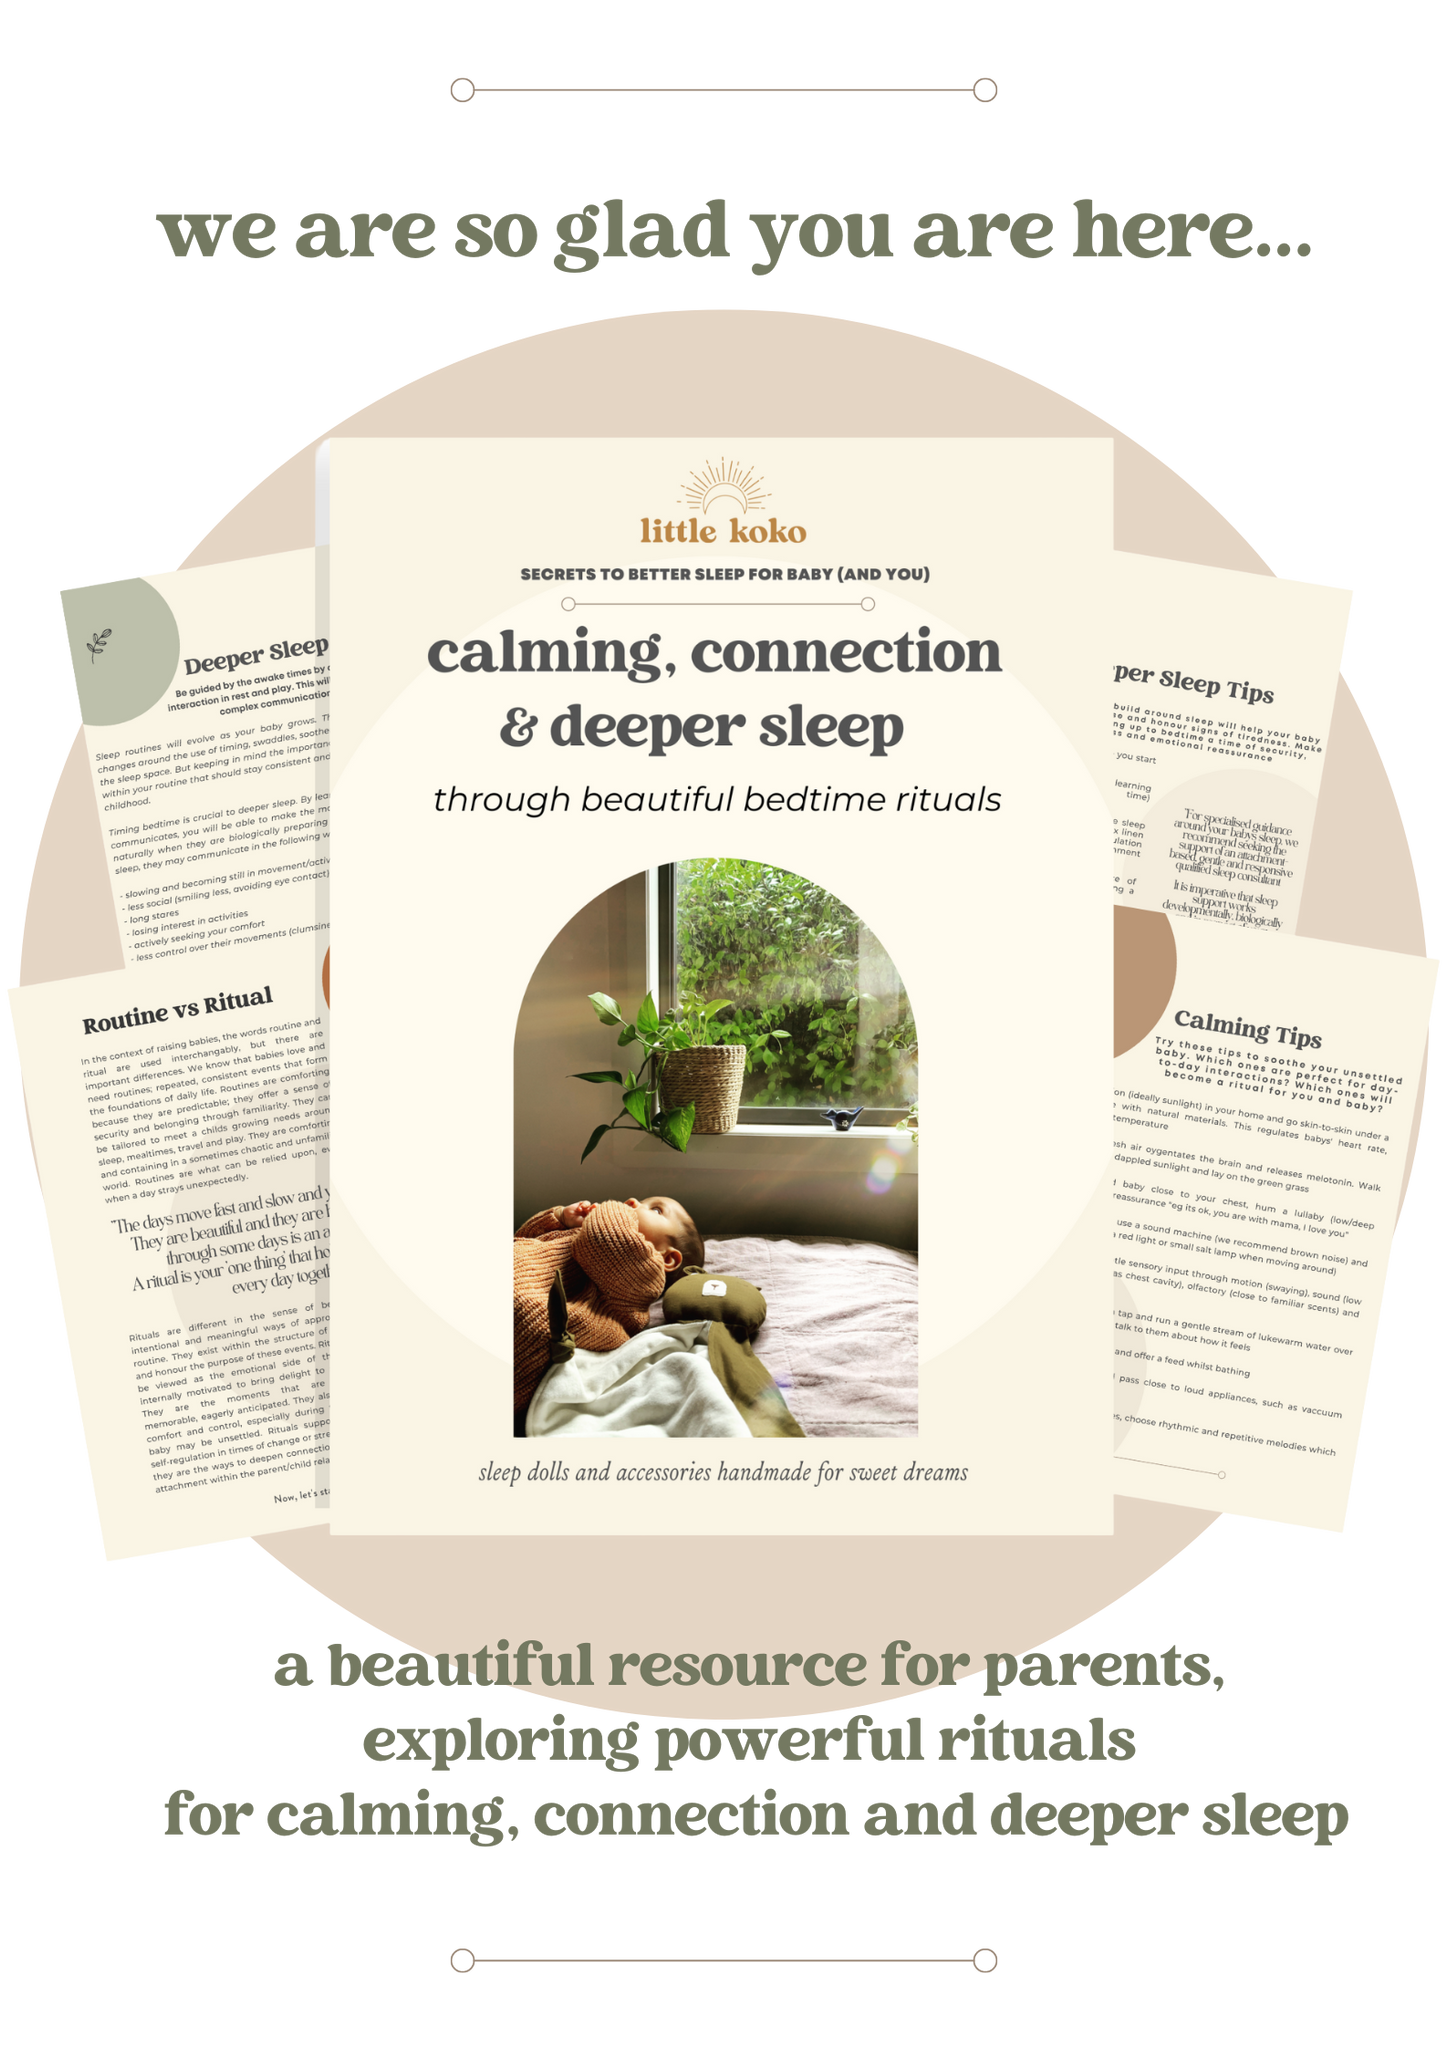 the front page of the little koko sleep guide for calming, connection and deeper sleep